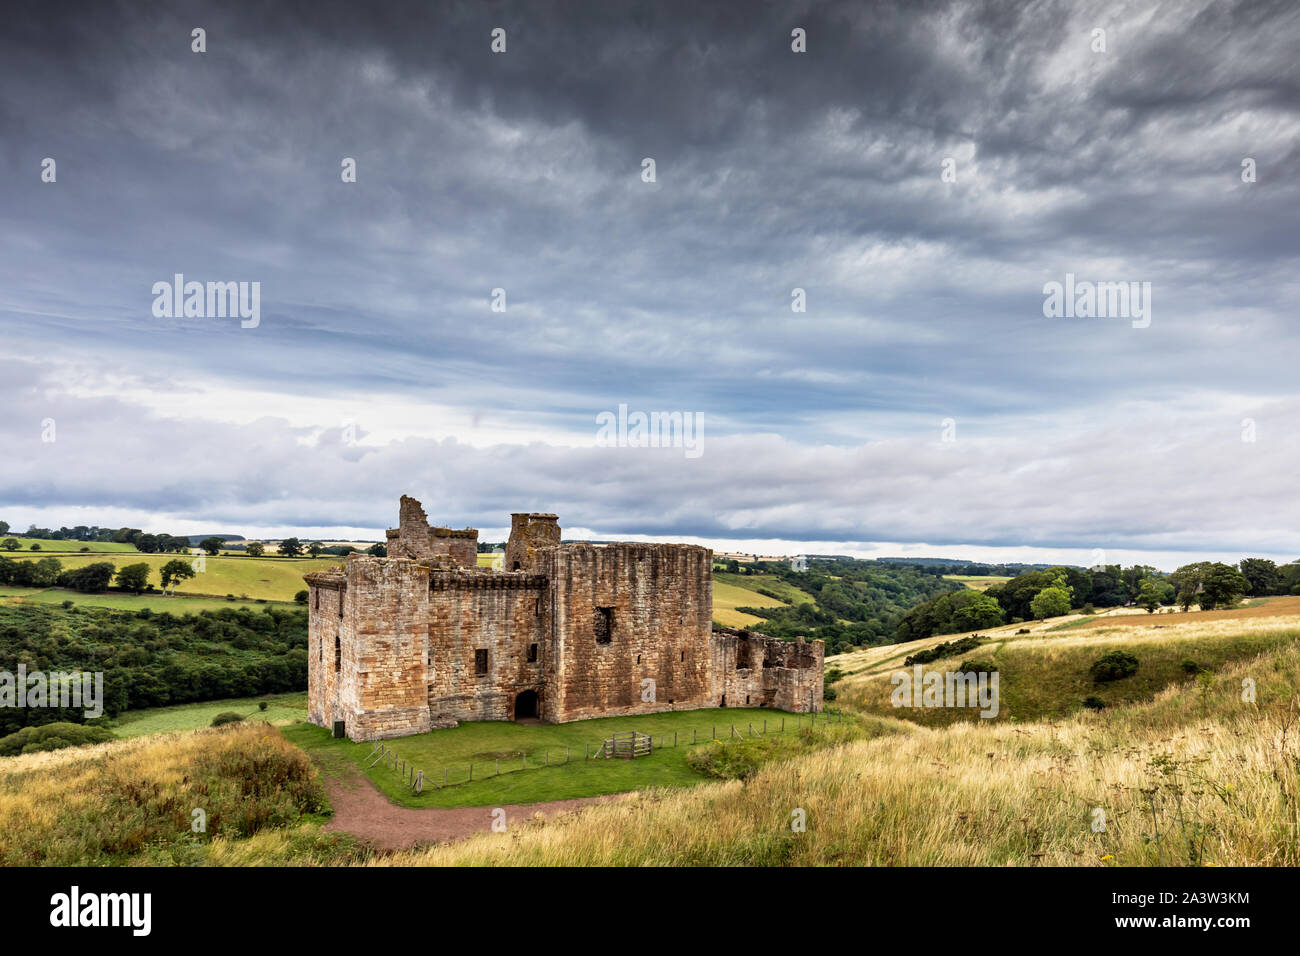 Crichton Castle is a ruined castle situated at the head of the River Tyne, near the village of Crichton, Midlothian, Scotland. Stock Photo